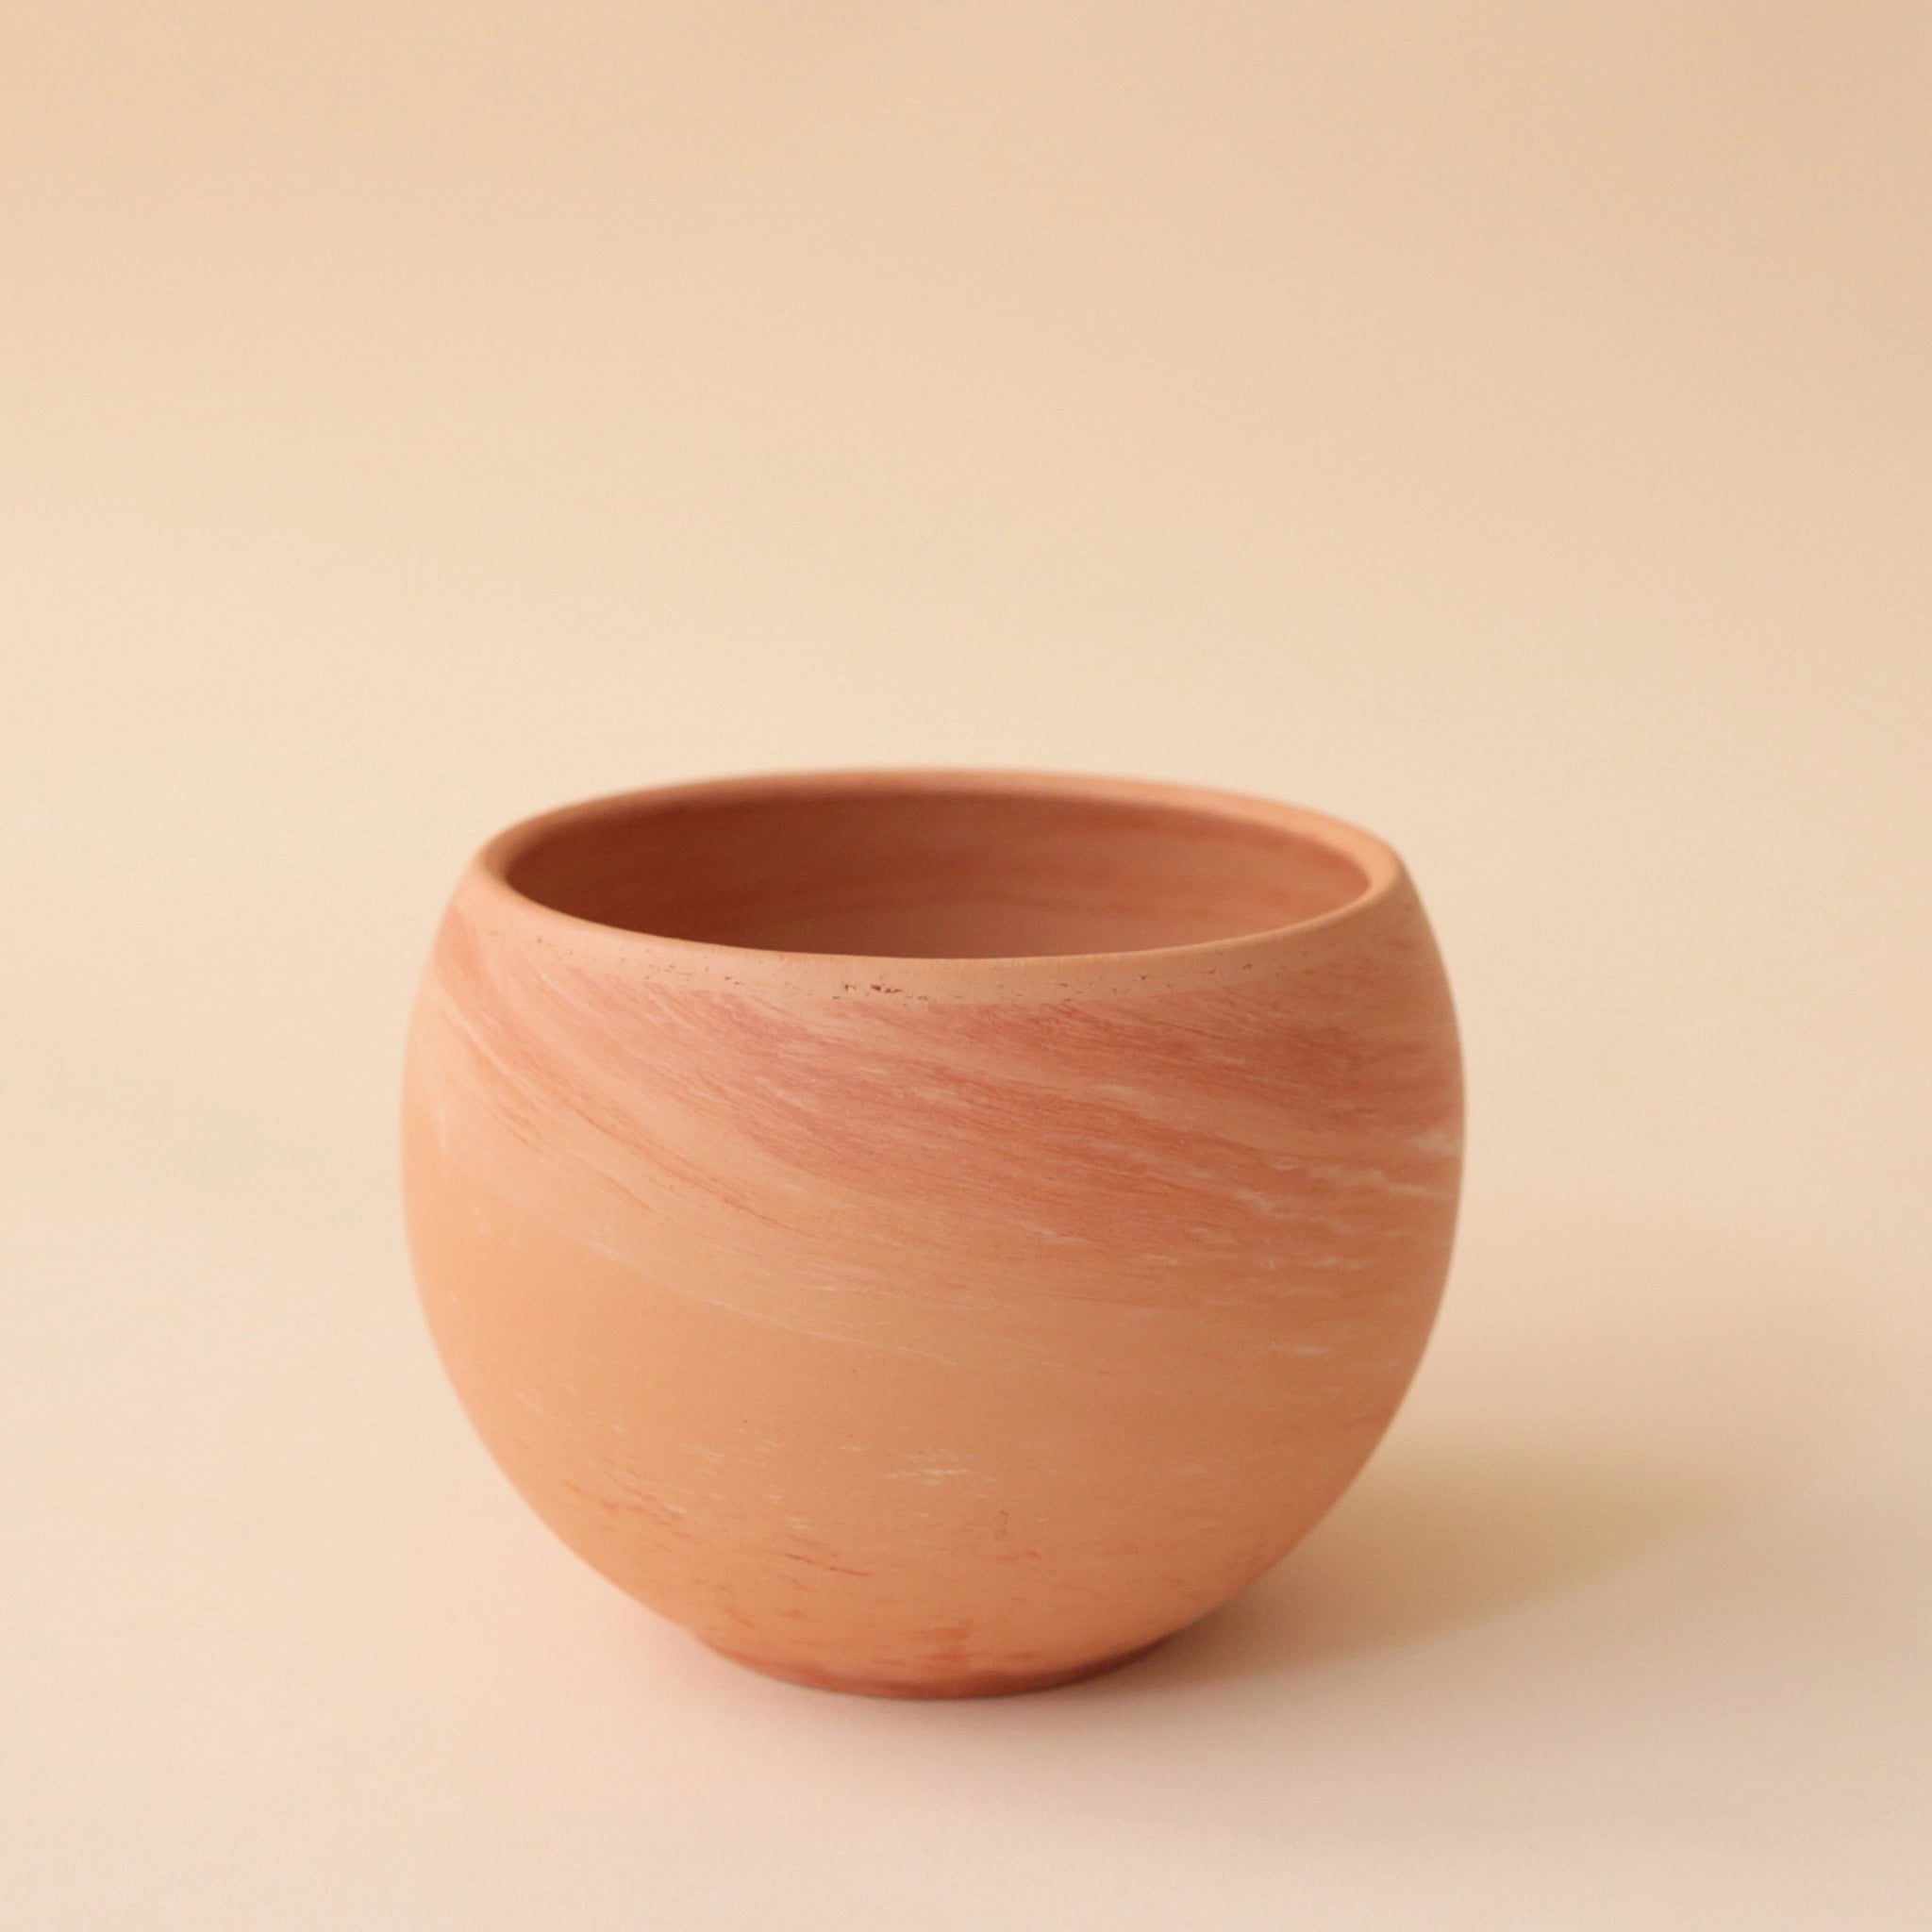 On a peach background is a terracotta circle planter.